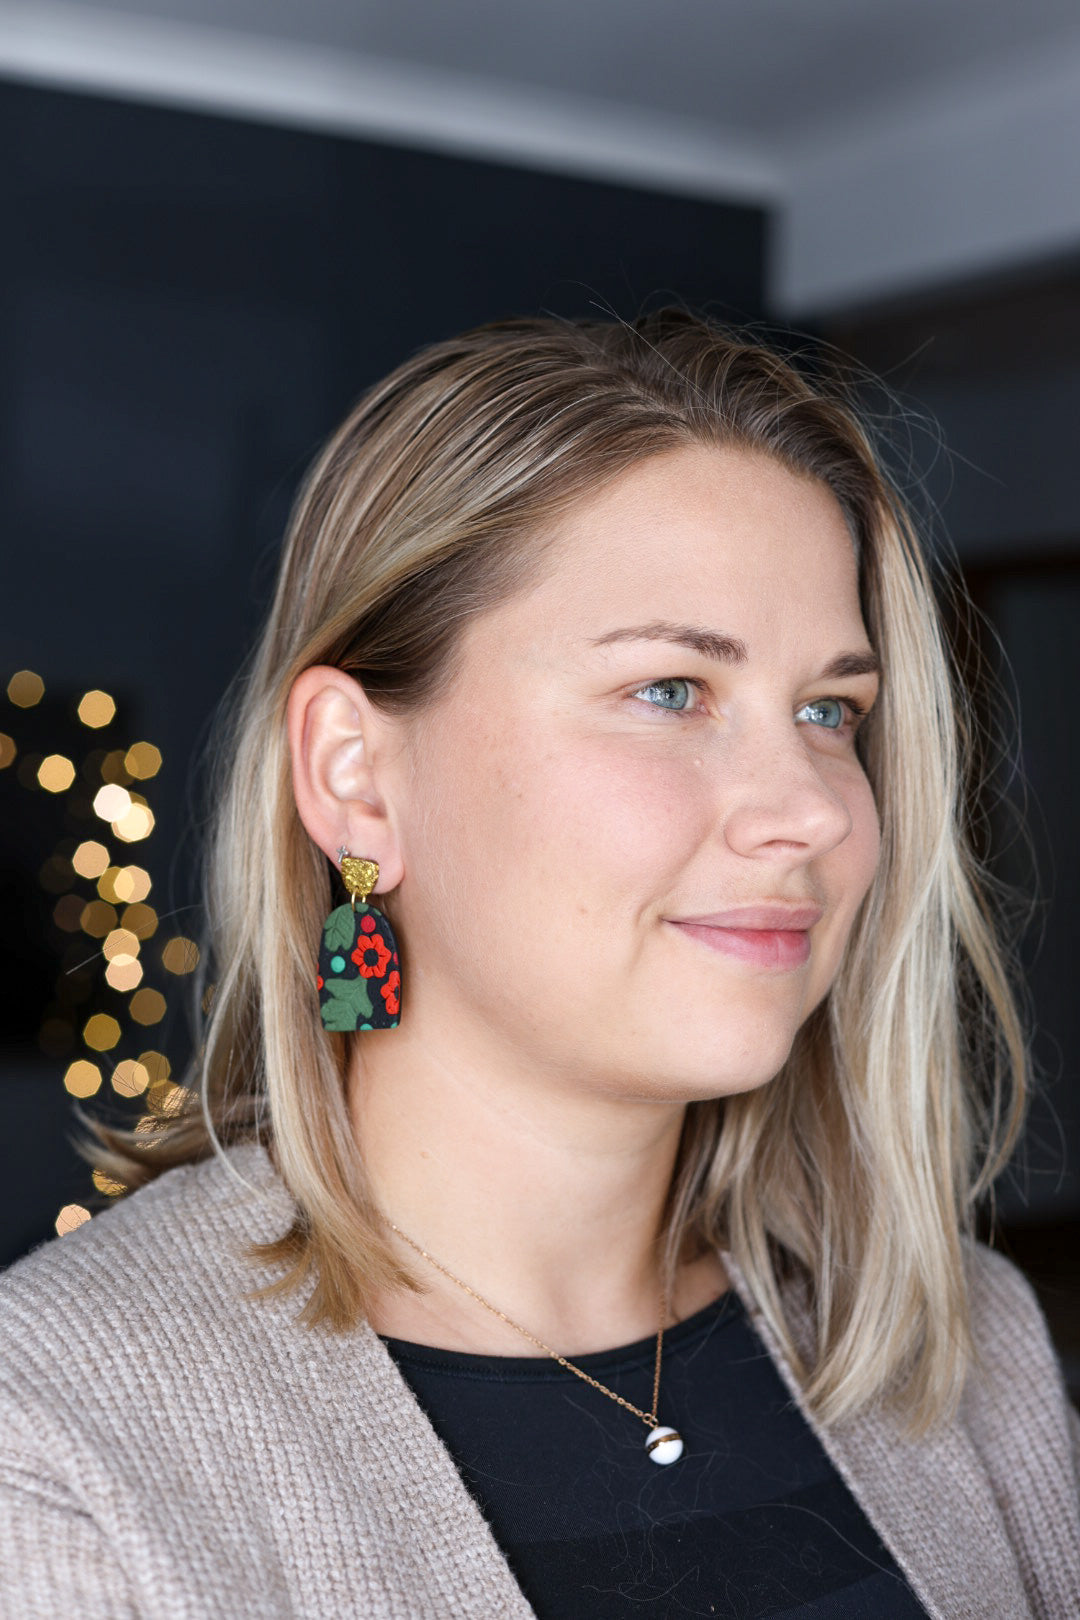 Cute bright statement earrings with stainless steel posts